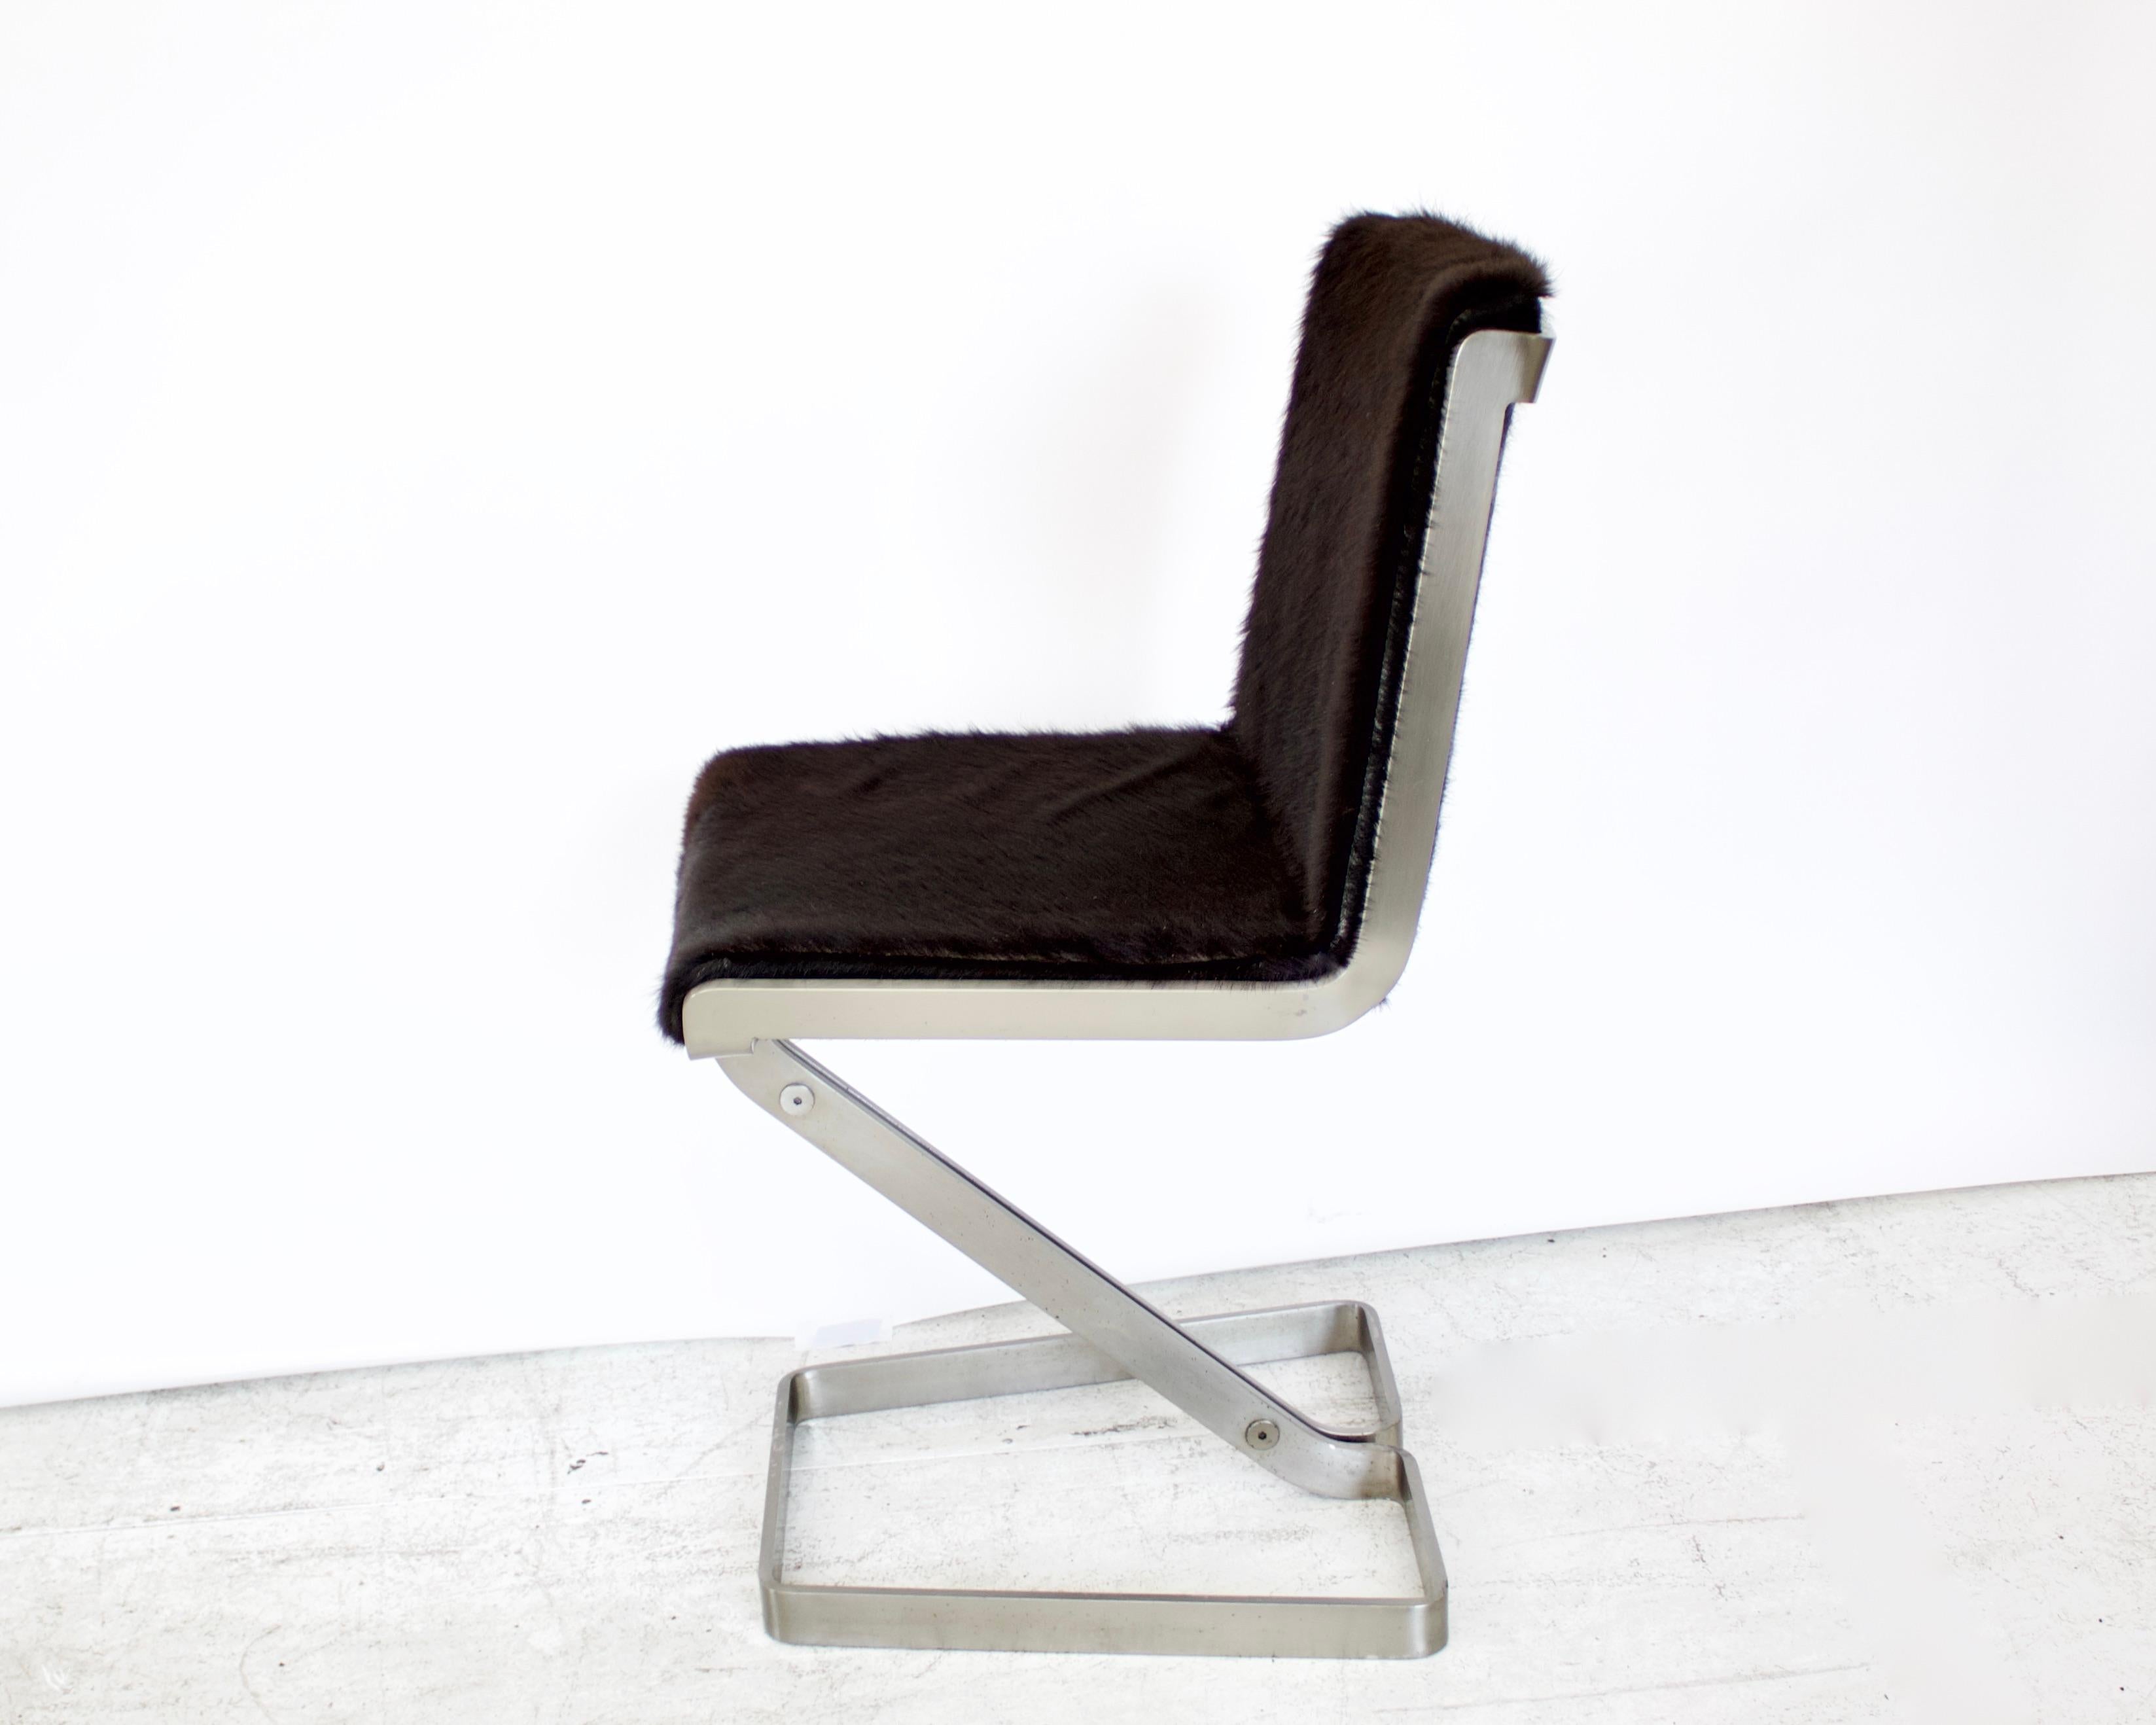 Italian Stainless Steel Desk Chair by Forma Nova, circa 1970 For Sale 1